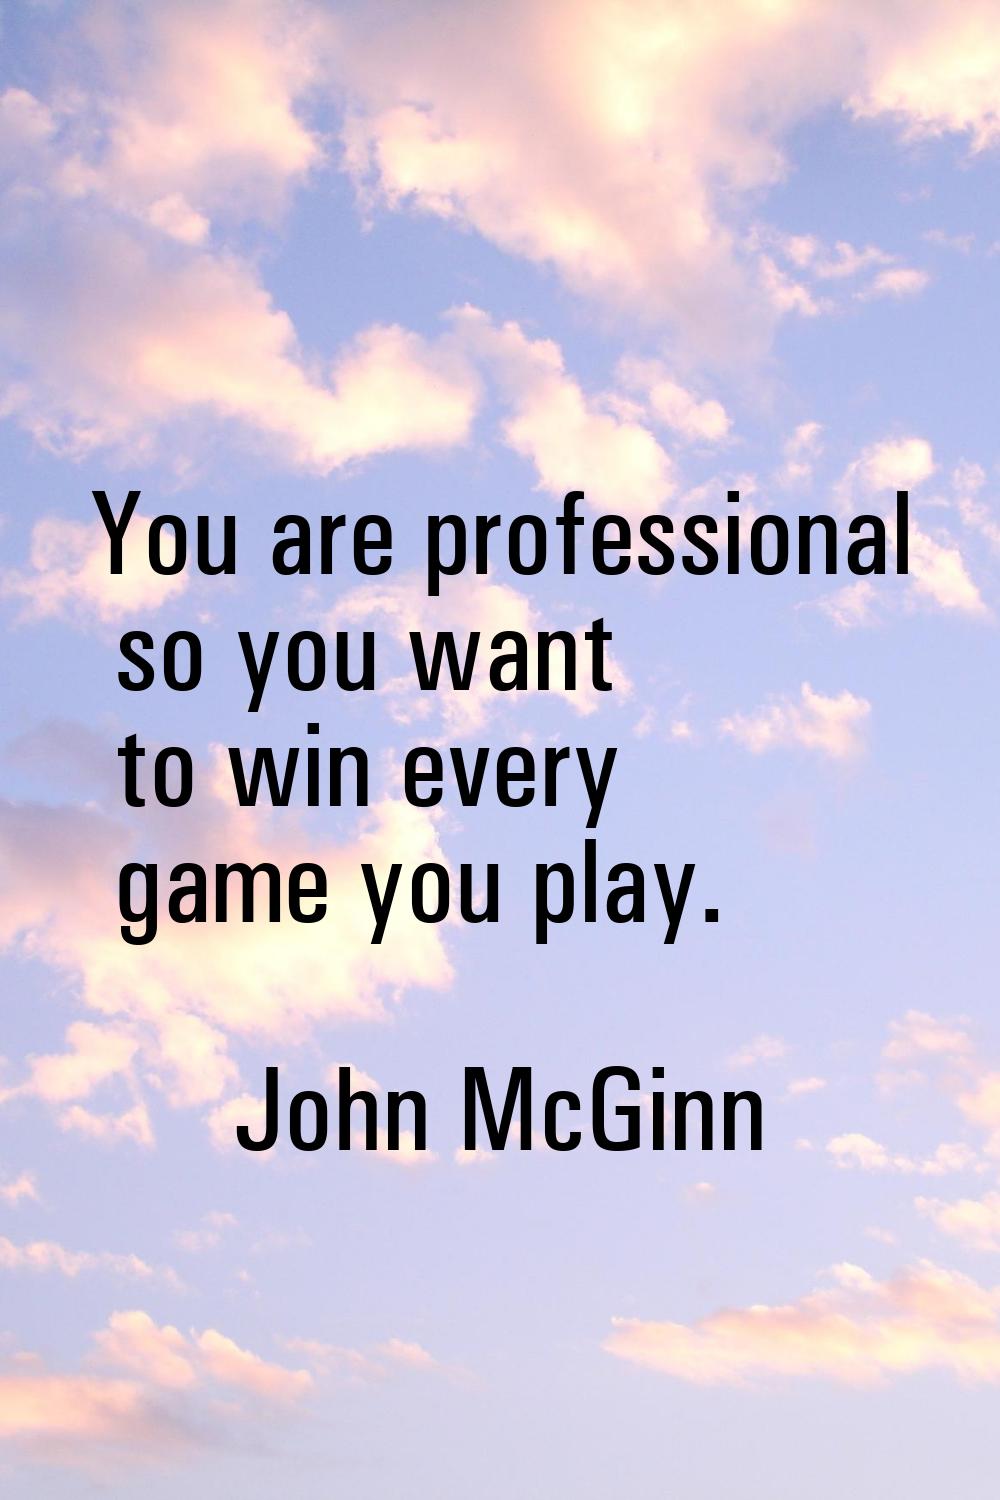 You are professional so you want to win every game you play.